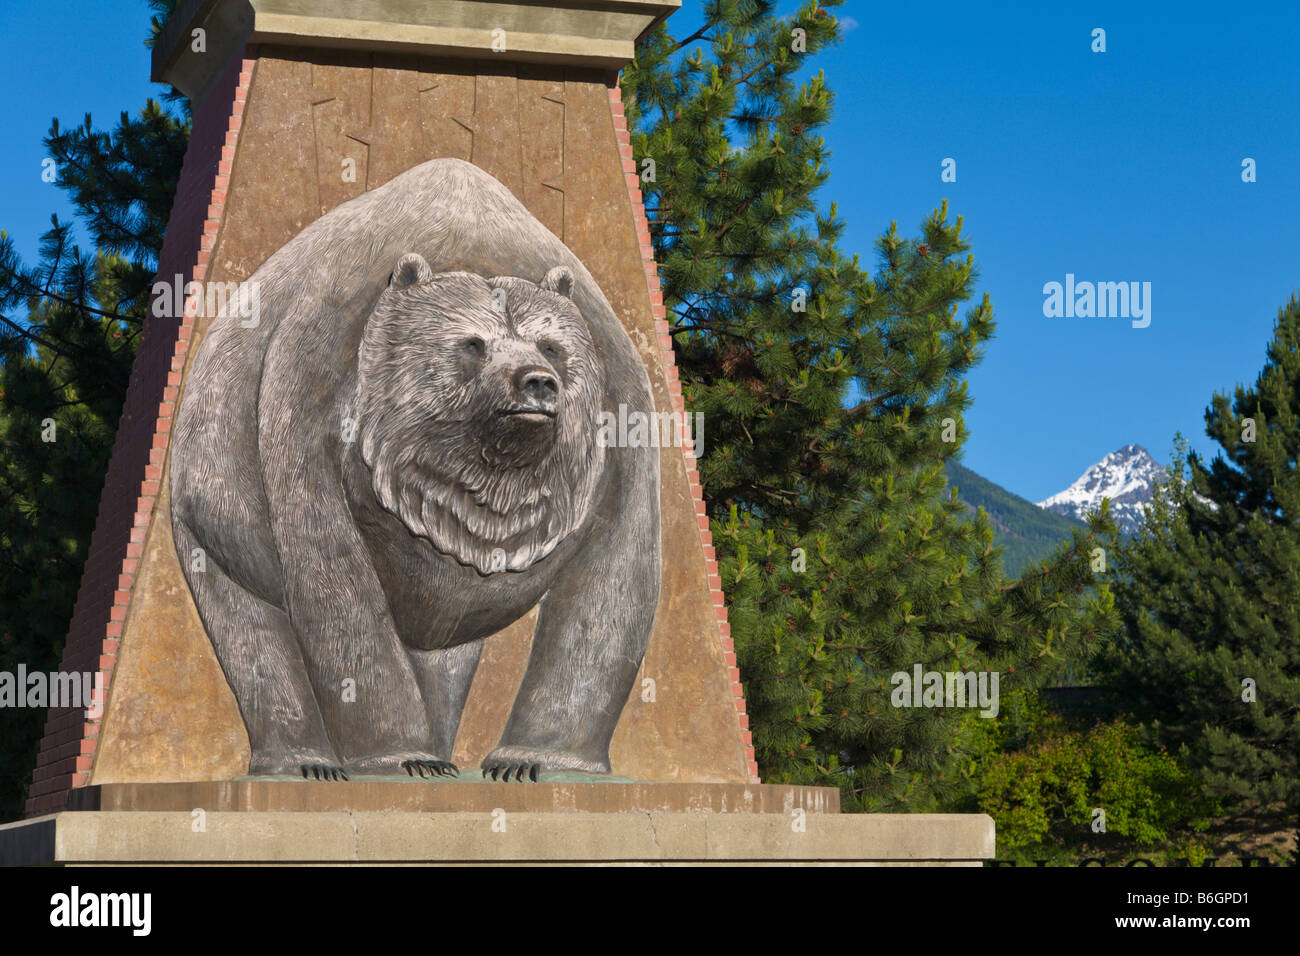 Carved wooden bear Entrance to city of Revelstoke 'British Columbia' Canada Stock Photo